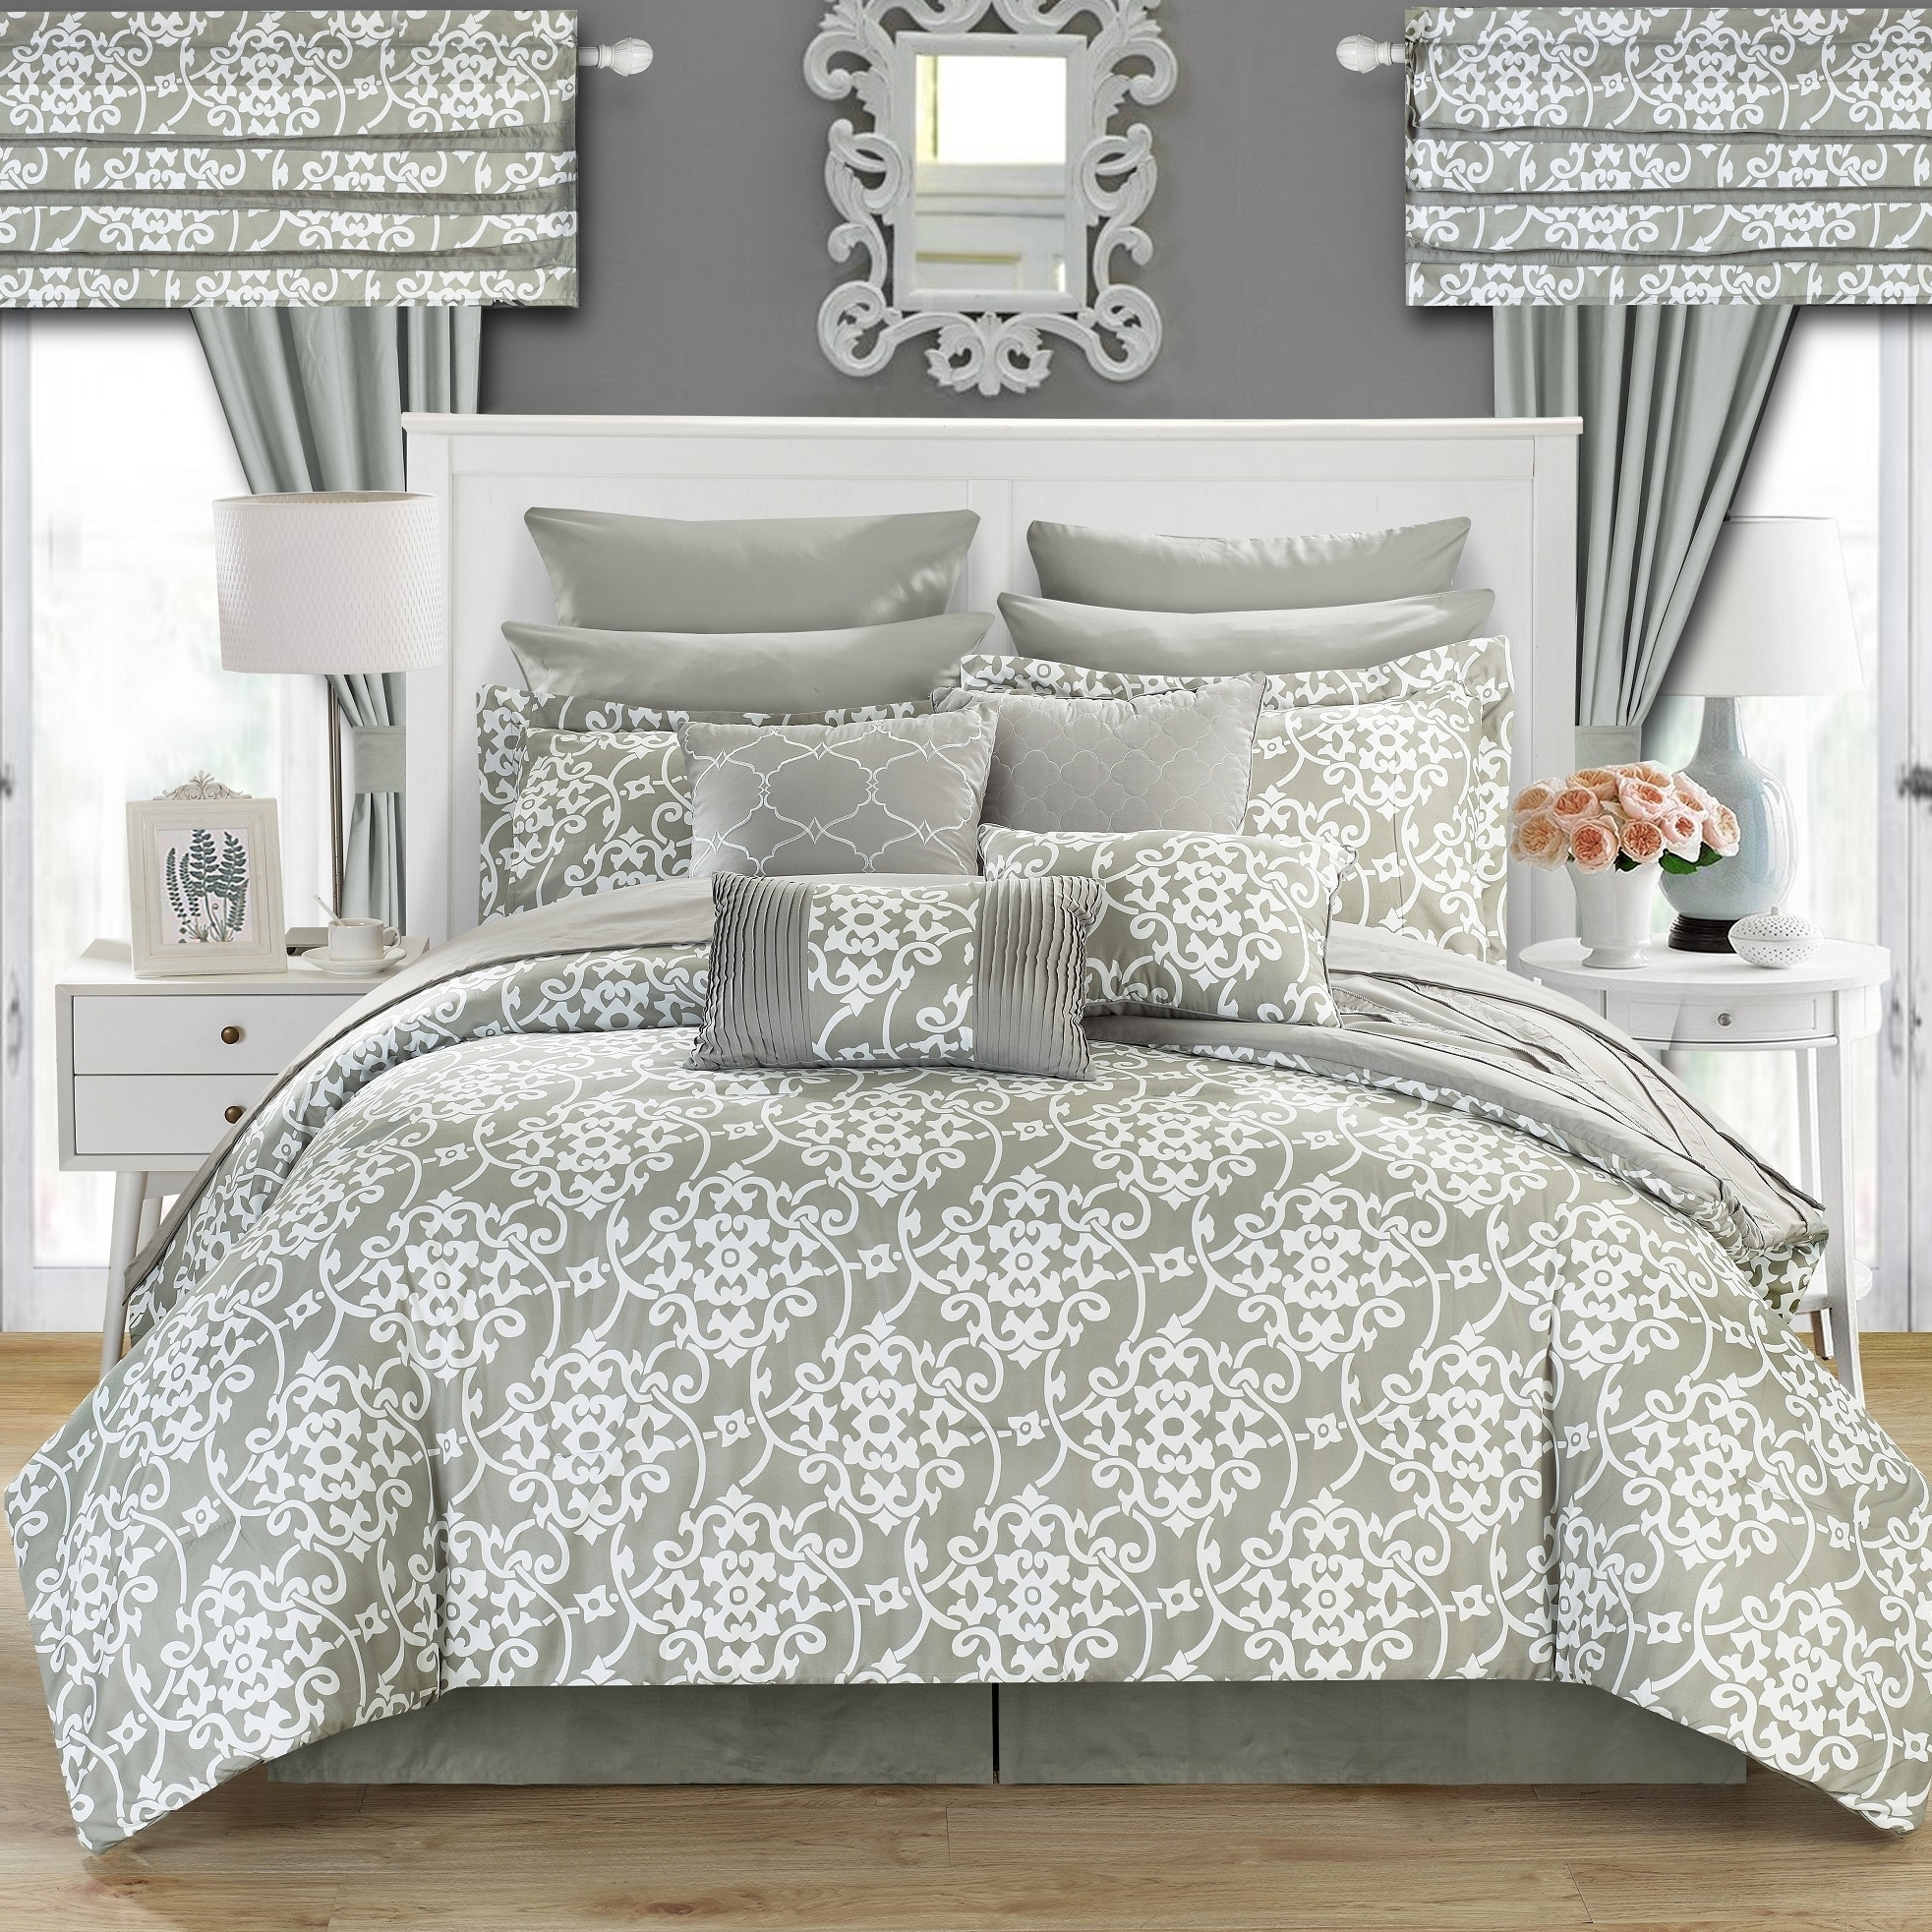 24 Piece Hailee Reversible Printed 2-in-1 Look Comforter Set Includes Sheets - Silver, King